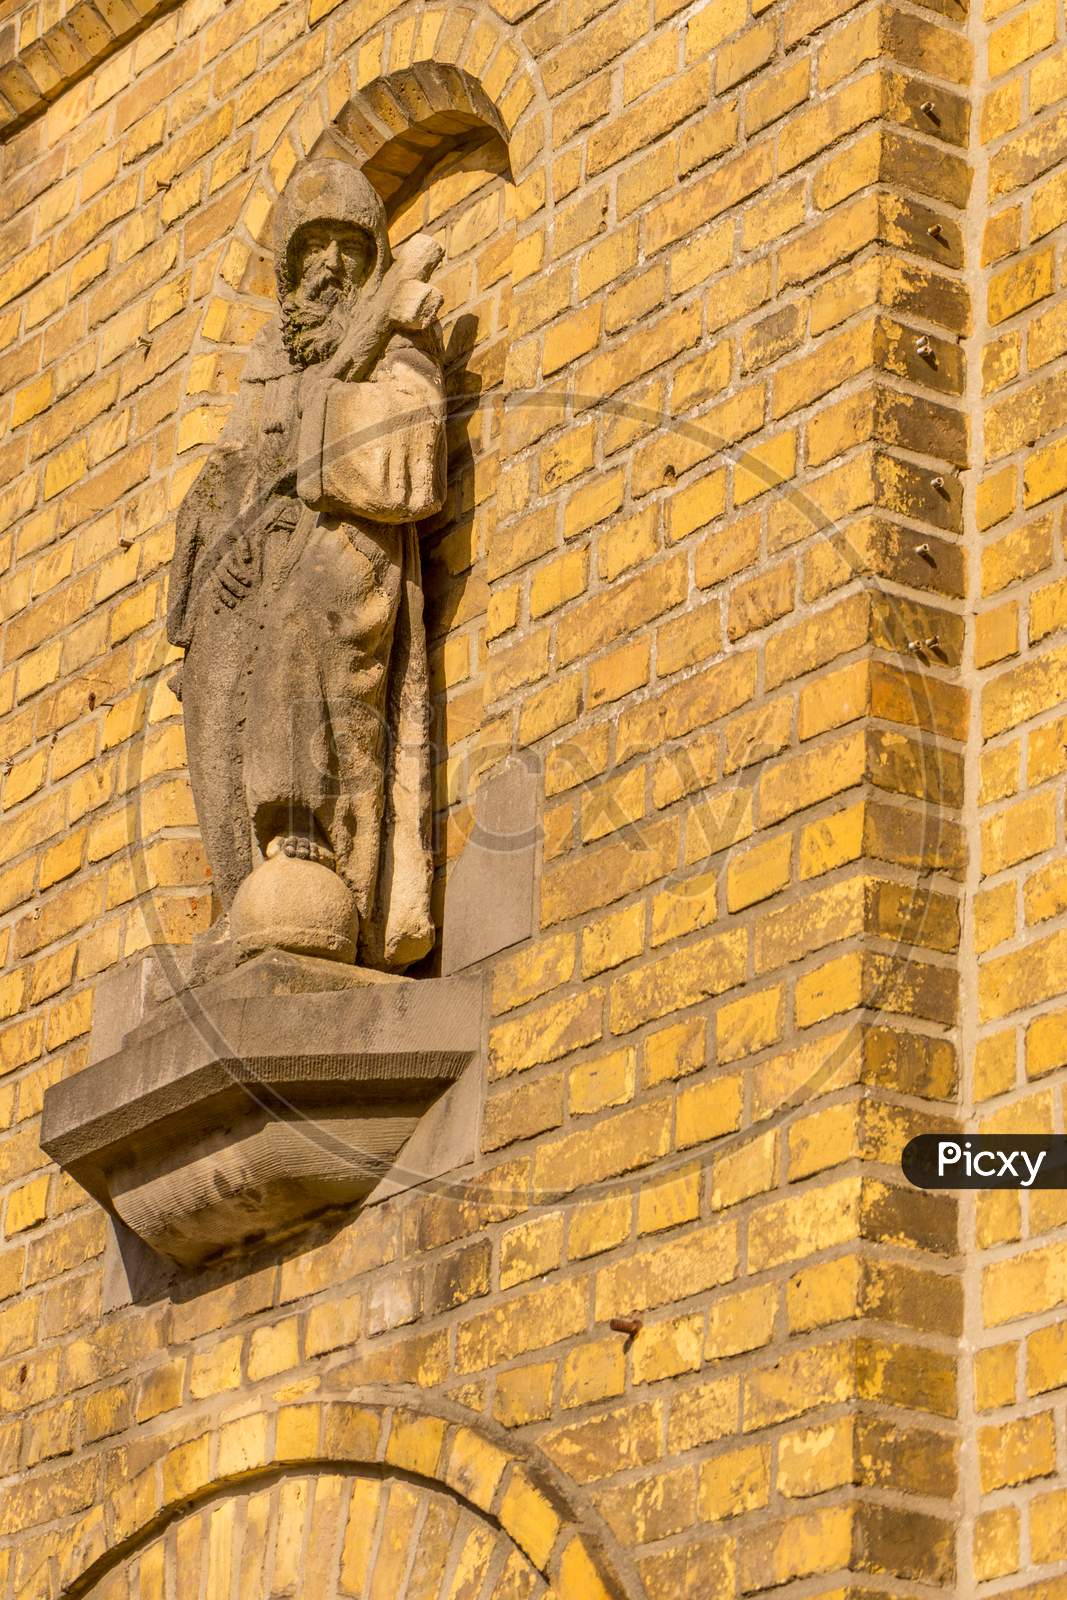 Belgium, Bruges, A Close Up Of A Christian Statue On A Reb Brick Building